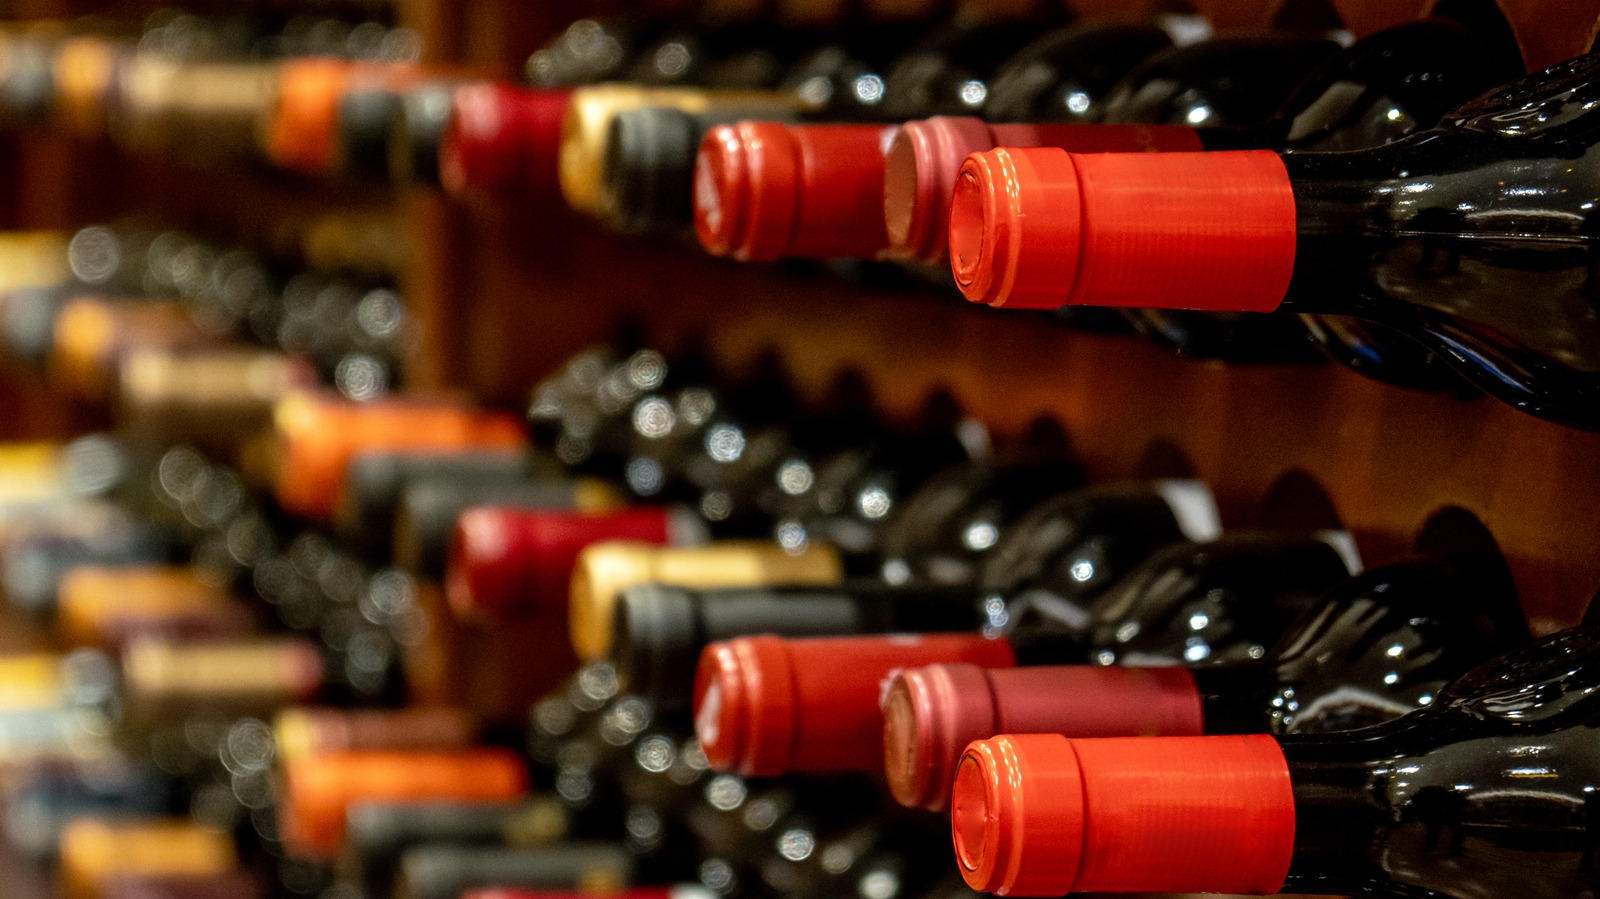 What does it mean when a bottle of wine is labeled “Reserve?”